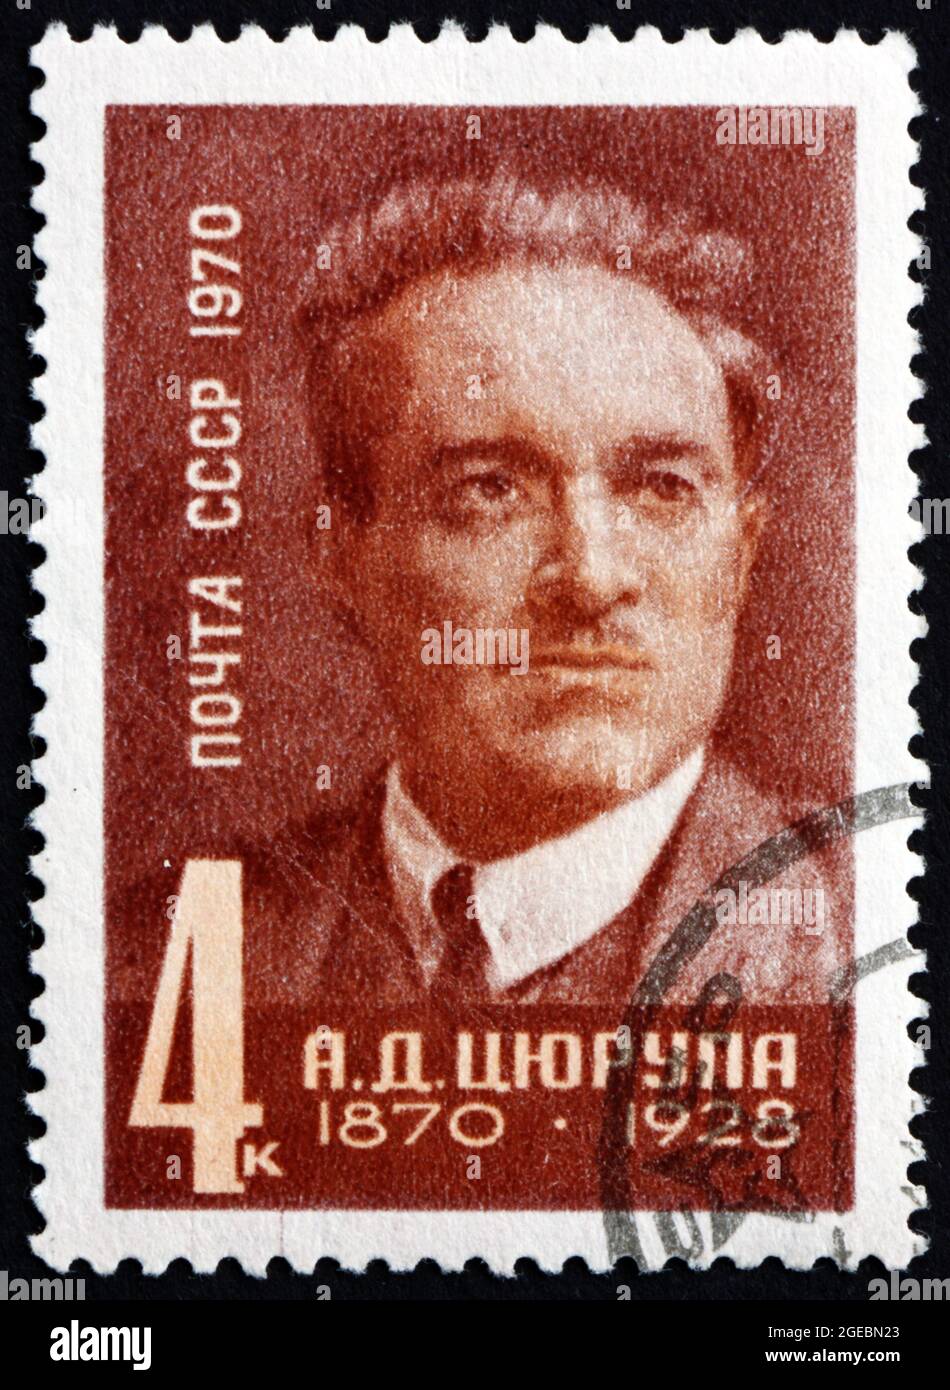 RUSSIA - CIRCA 1970: a stamp printed in the Russia shows Alexander Dmitrievich Tsyurupa, First Vice Chairman of the Soviet of Peoples Commissars, circ Stock Photo